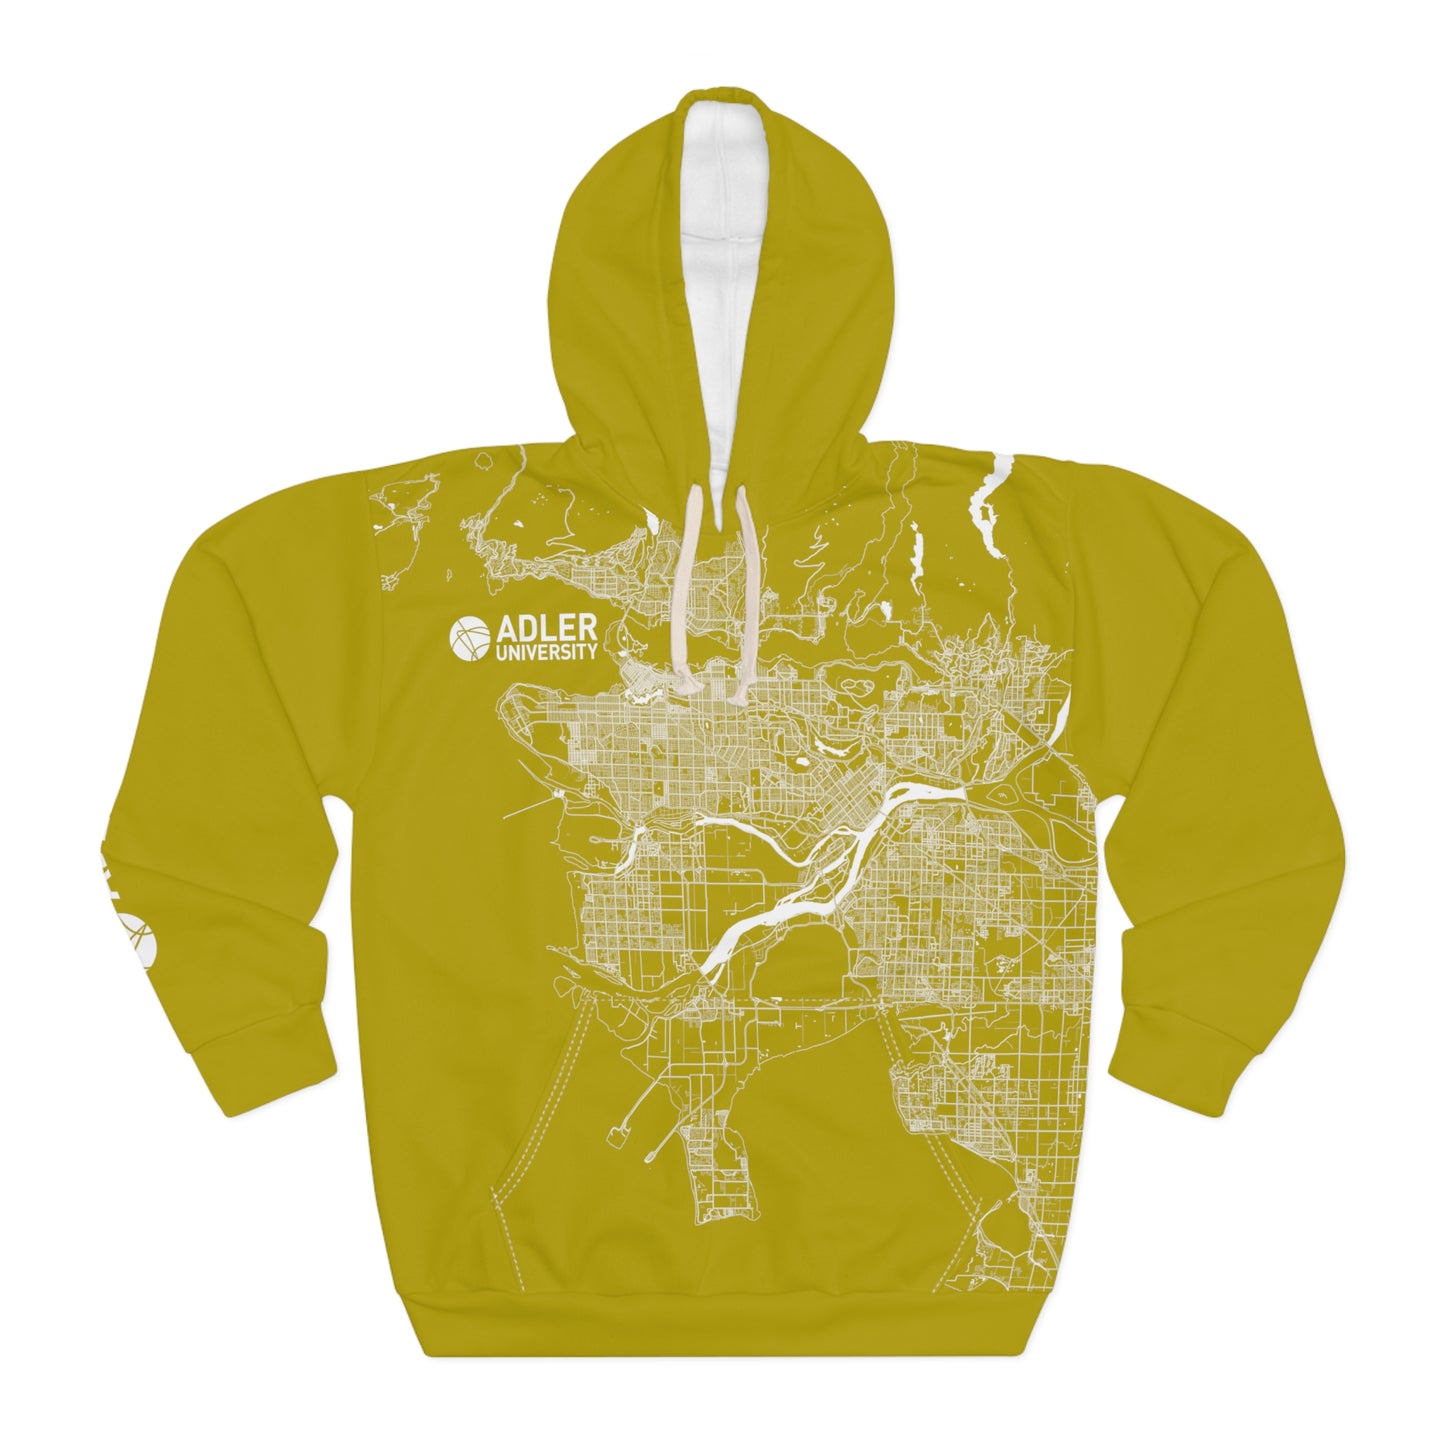 Adler University Vancouver Unisex Pullover Hoodie - Chartreuse